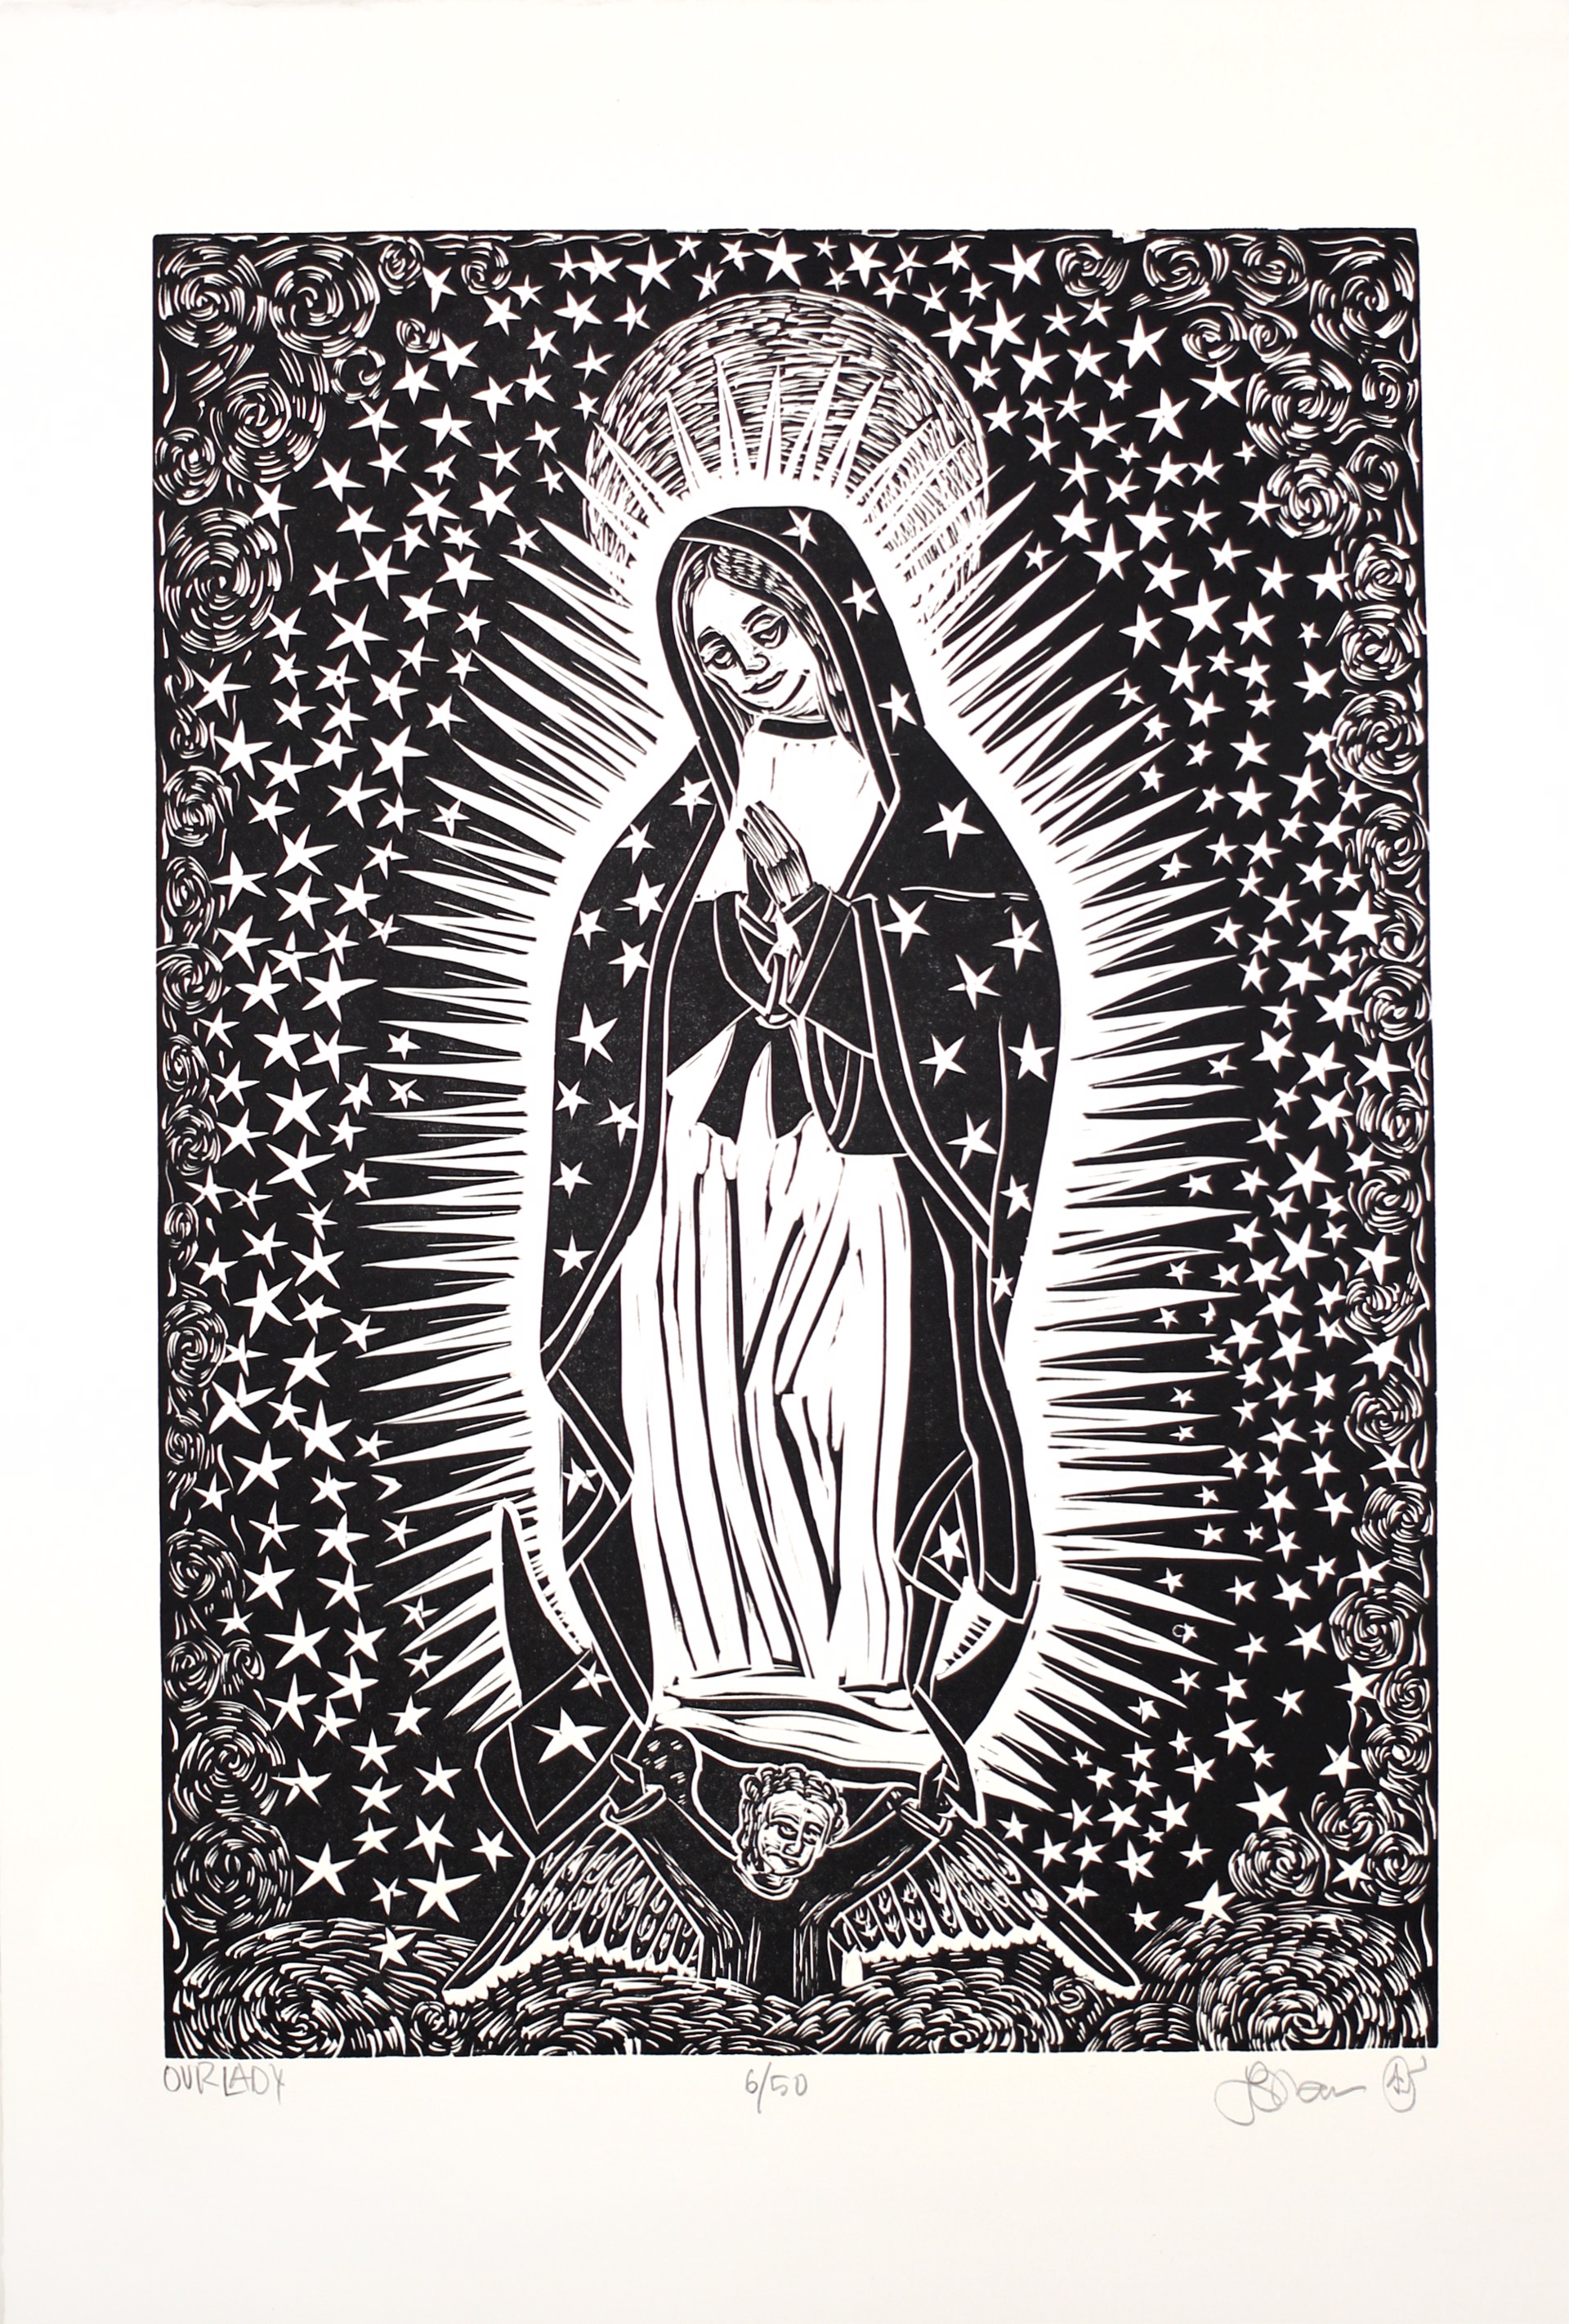 Our Lady by Luis Garcia